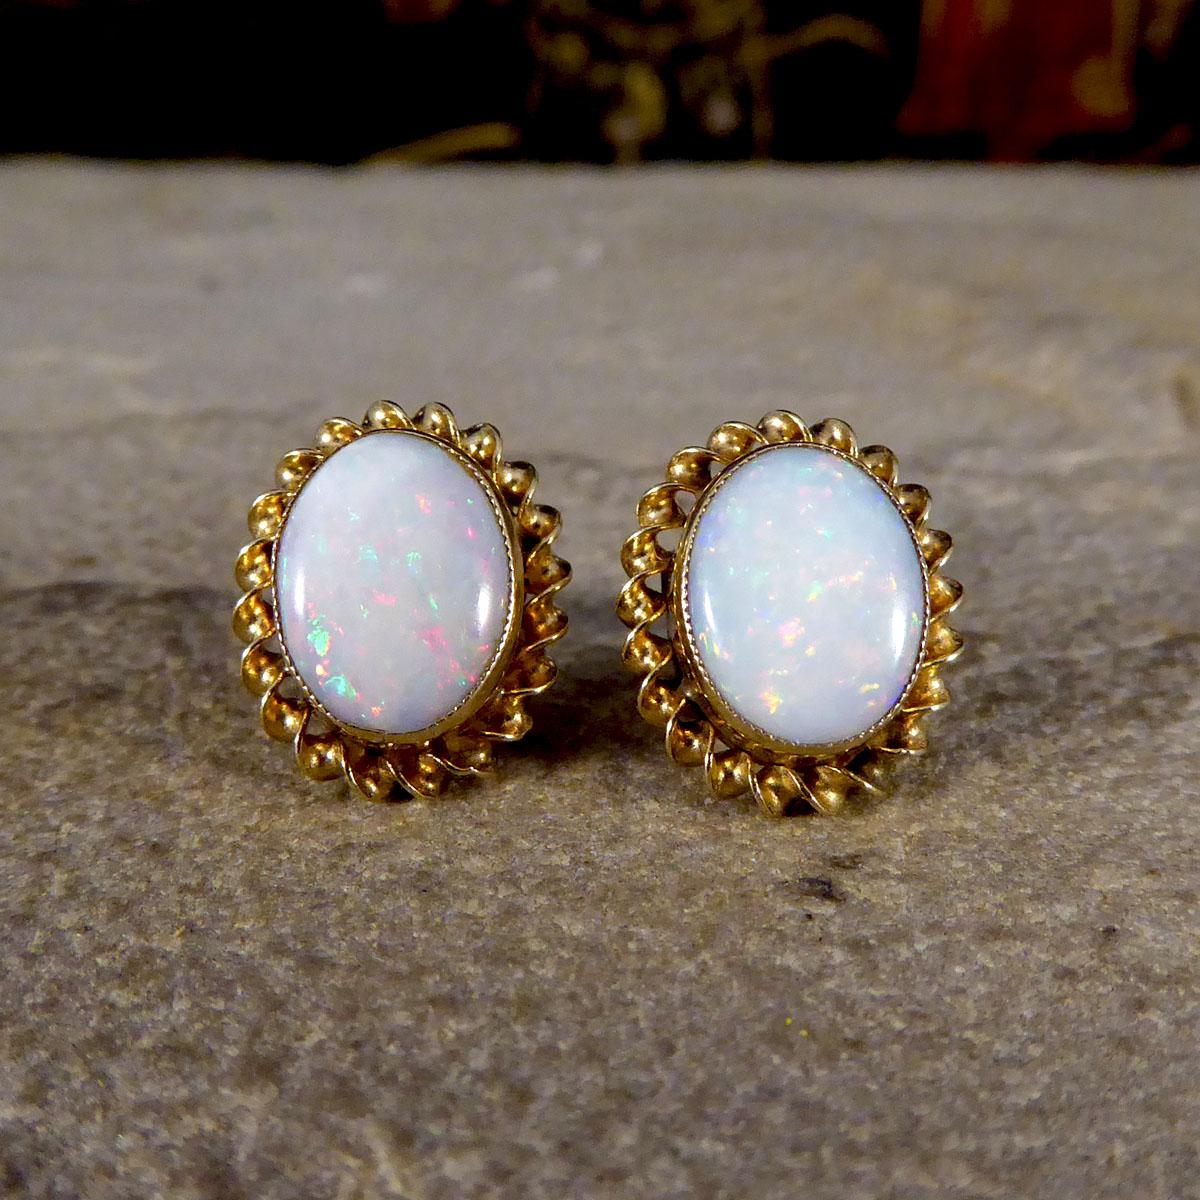 These lovely classic earrings have been fully crafted from 9ct Yellow Gold with hallmarks down the stem showing they were made in Birmingham. These earrings hold an oval shaped Opal in each stud showing lovely colours in a collar setting, a perfect